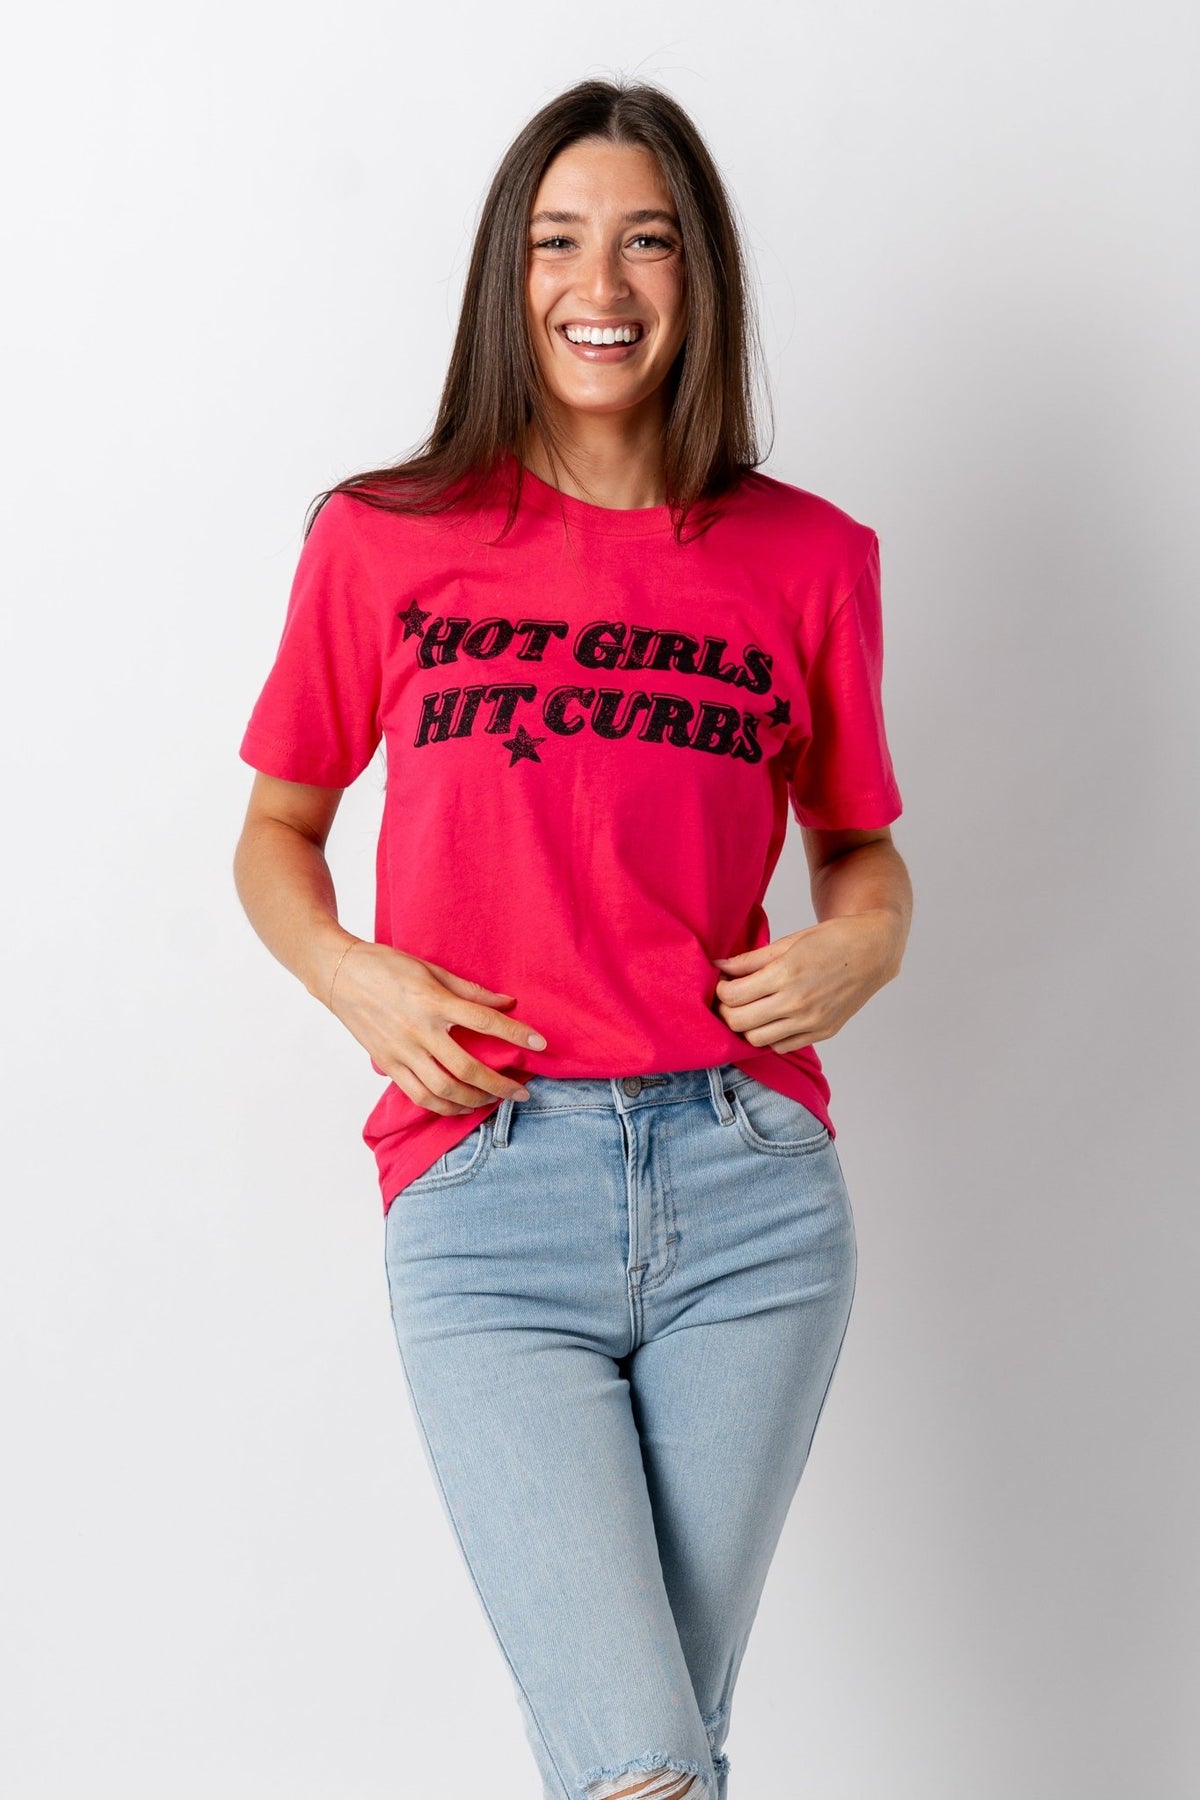 Hot girls hit curbs t-shirt hot pink - Stylish t-shirt - Trendy Graphic T-Shirts and Tank Tops at Lush Fashion Lounge Boutique in Oklahoma City